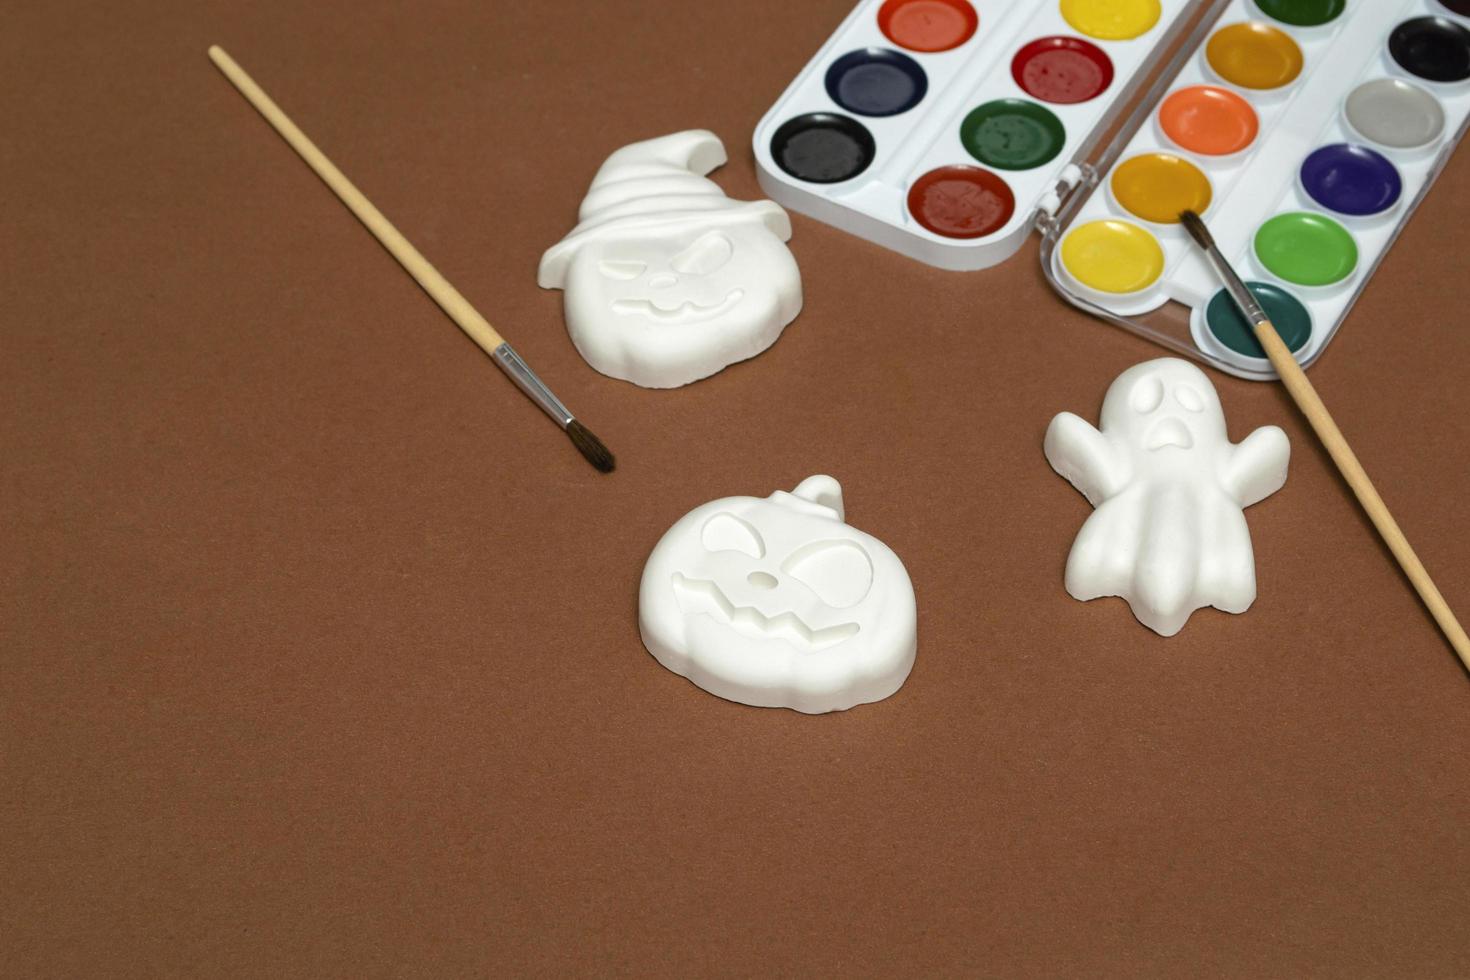 Halloween crafts. Gibs figurines of pumpkins and ghosts in bright paint with a brush on a brown background, ready for drawing close-up photo